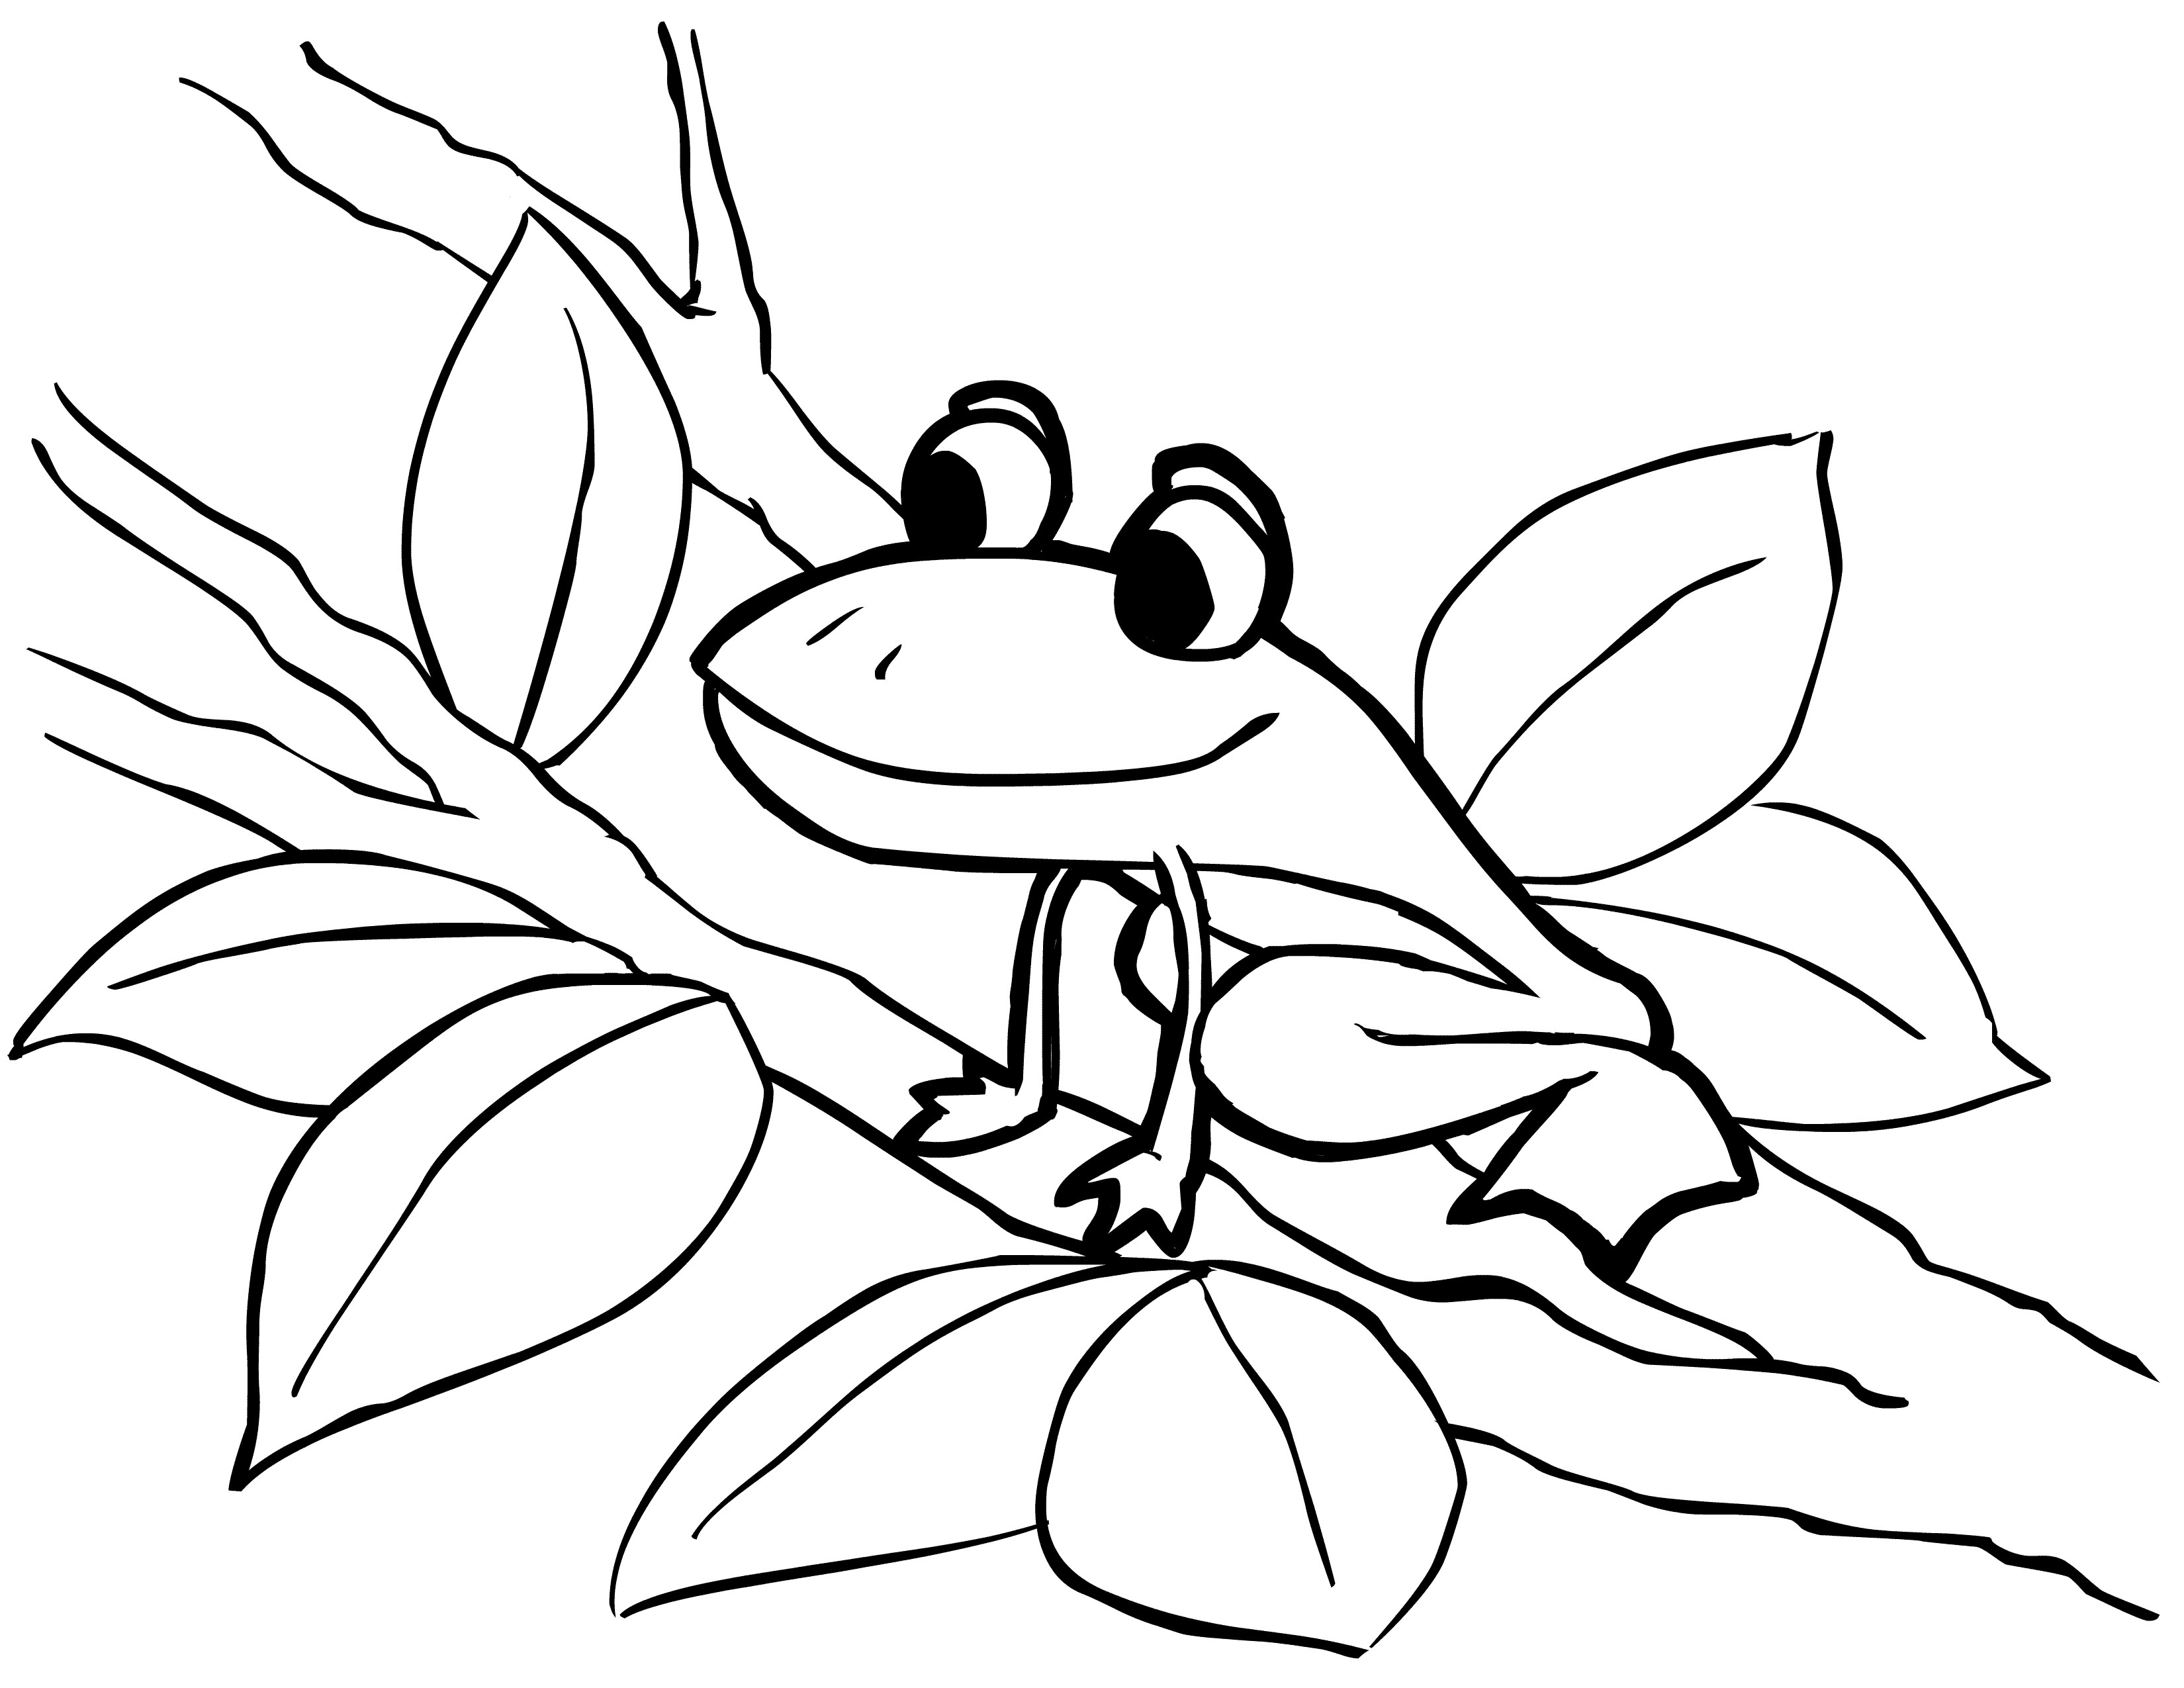 Frog Coloring Pages
 Free Printable Frog Coloring Pages For Kids